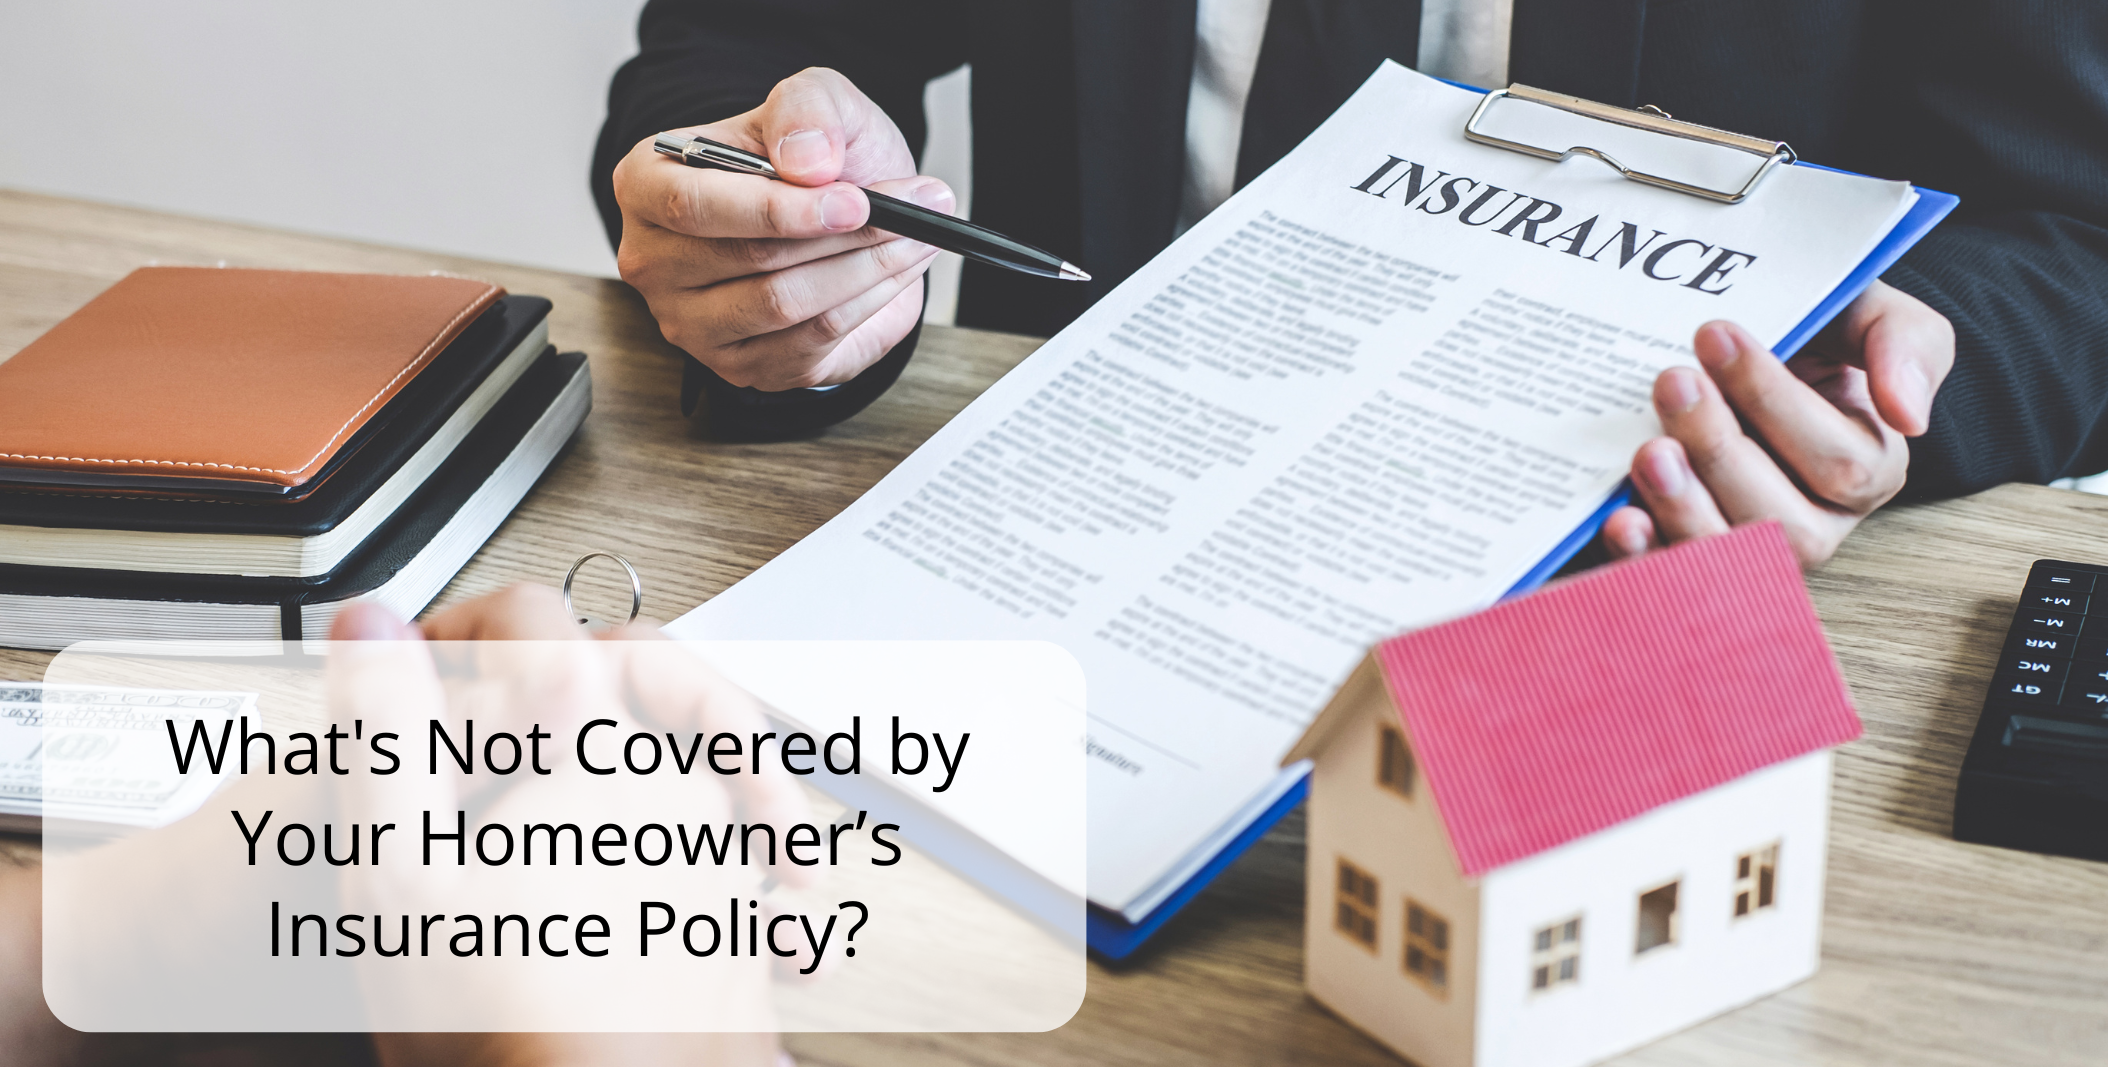 What's Not Covered by Your Homeowner’s Insurance Policy?